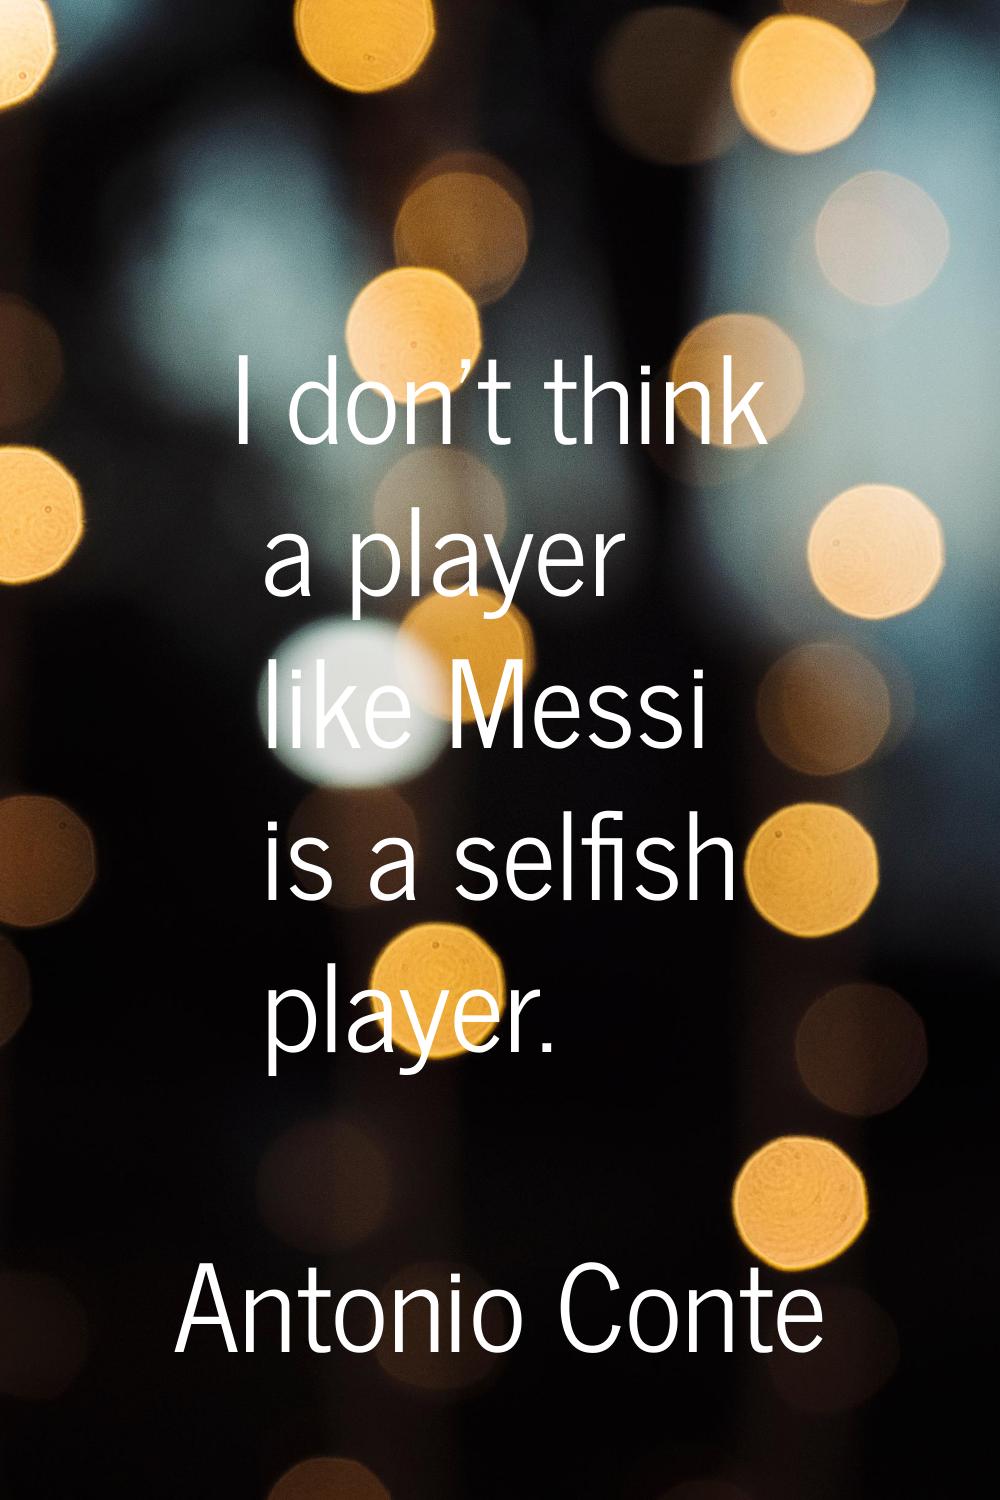 I don't think a player like Messi is a selfish player.